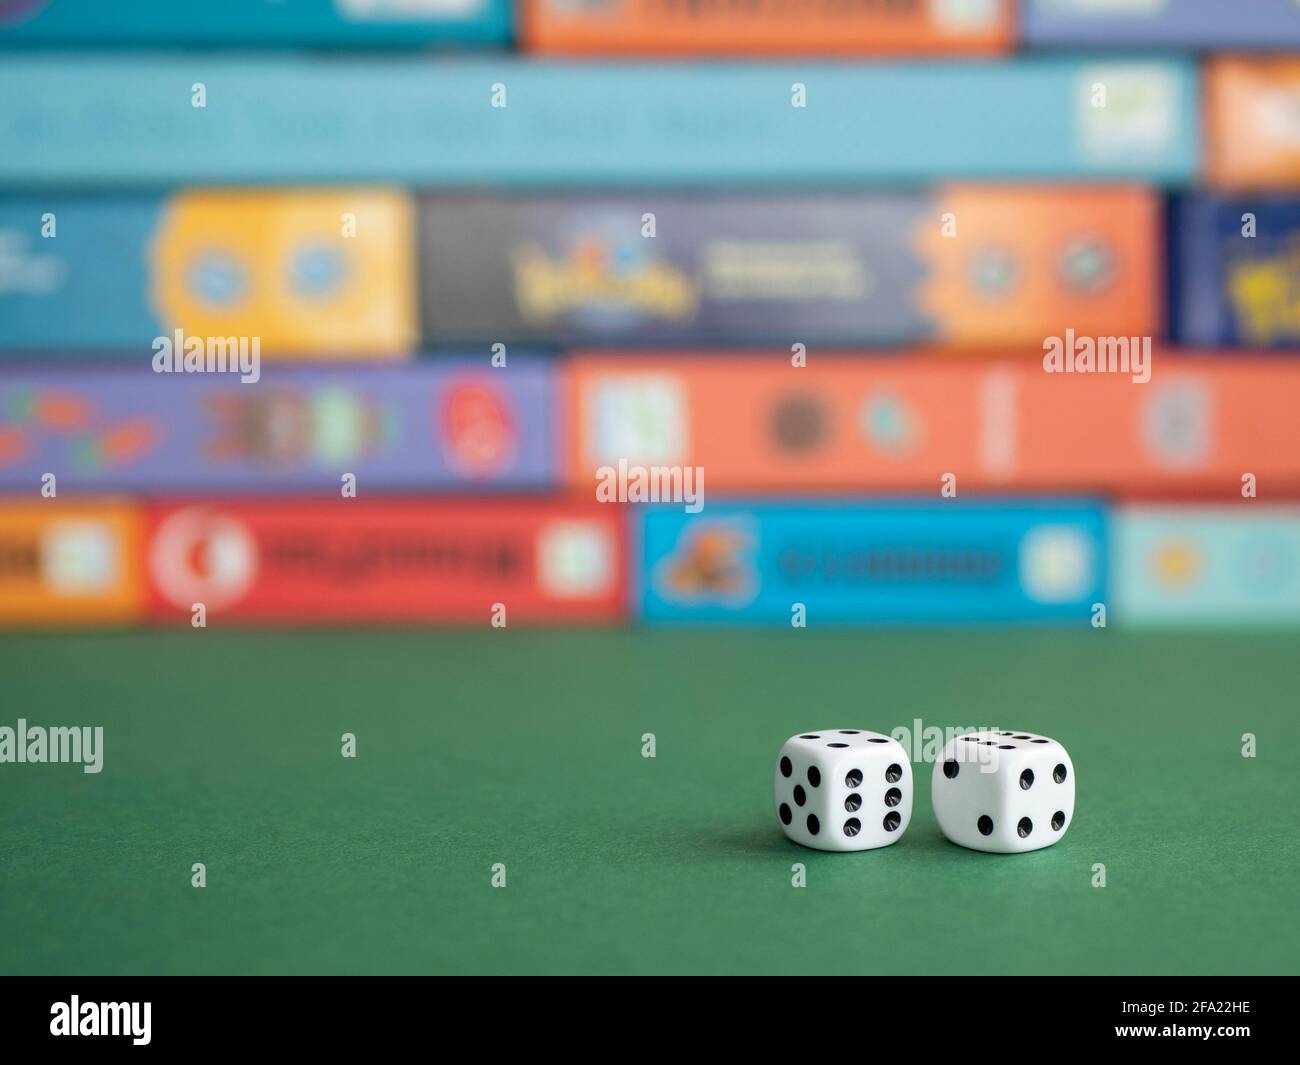 Two dice on the background of board game boxes. Dice games for kids, tweens and adults Stock Photo